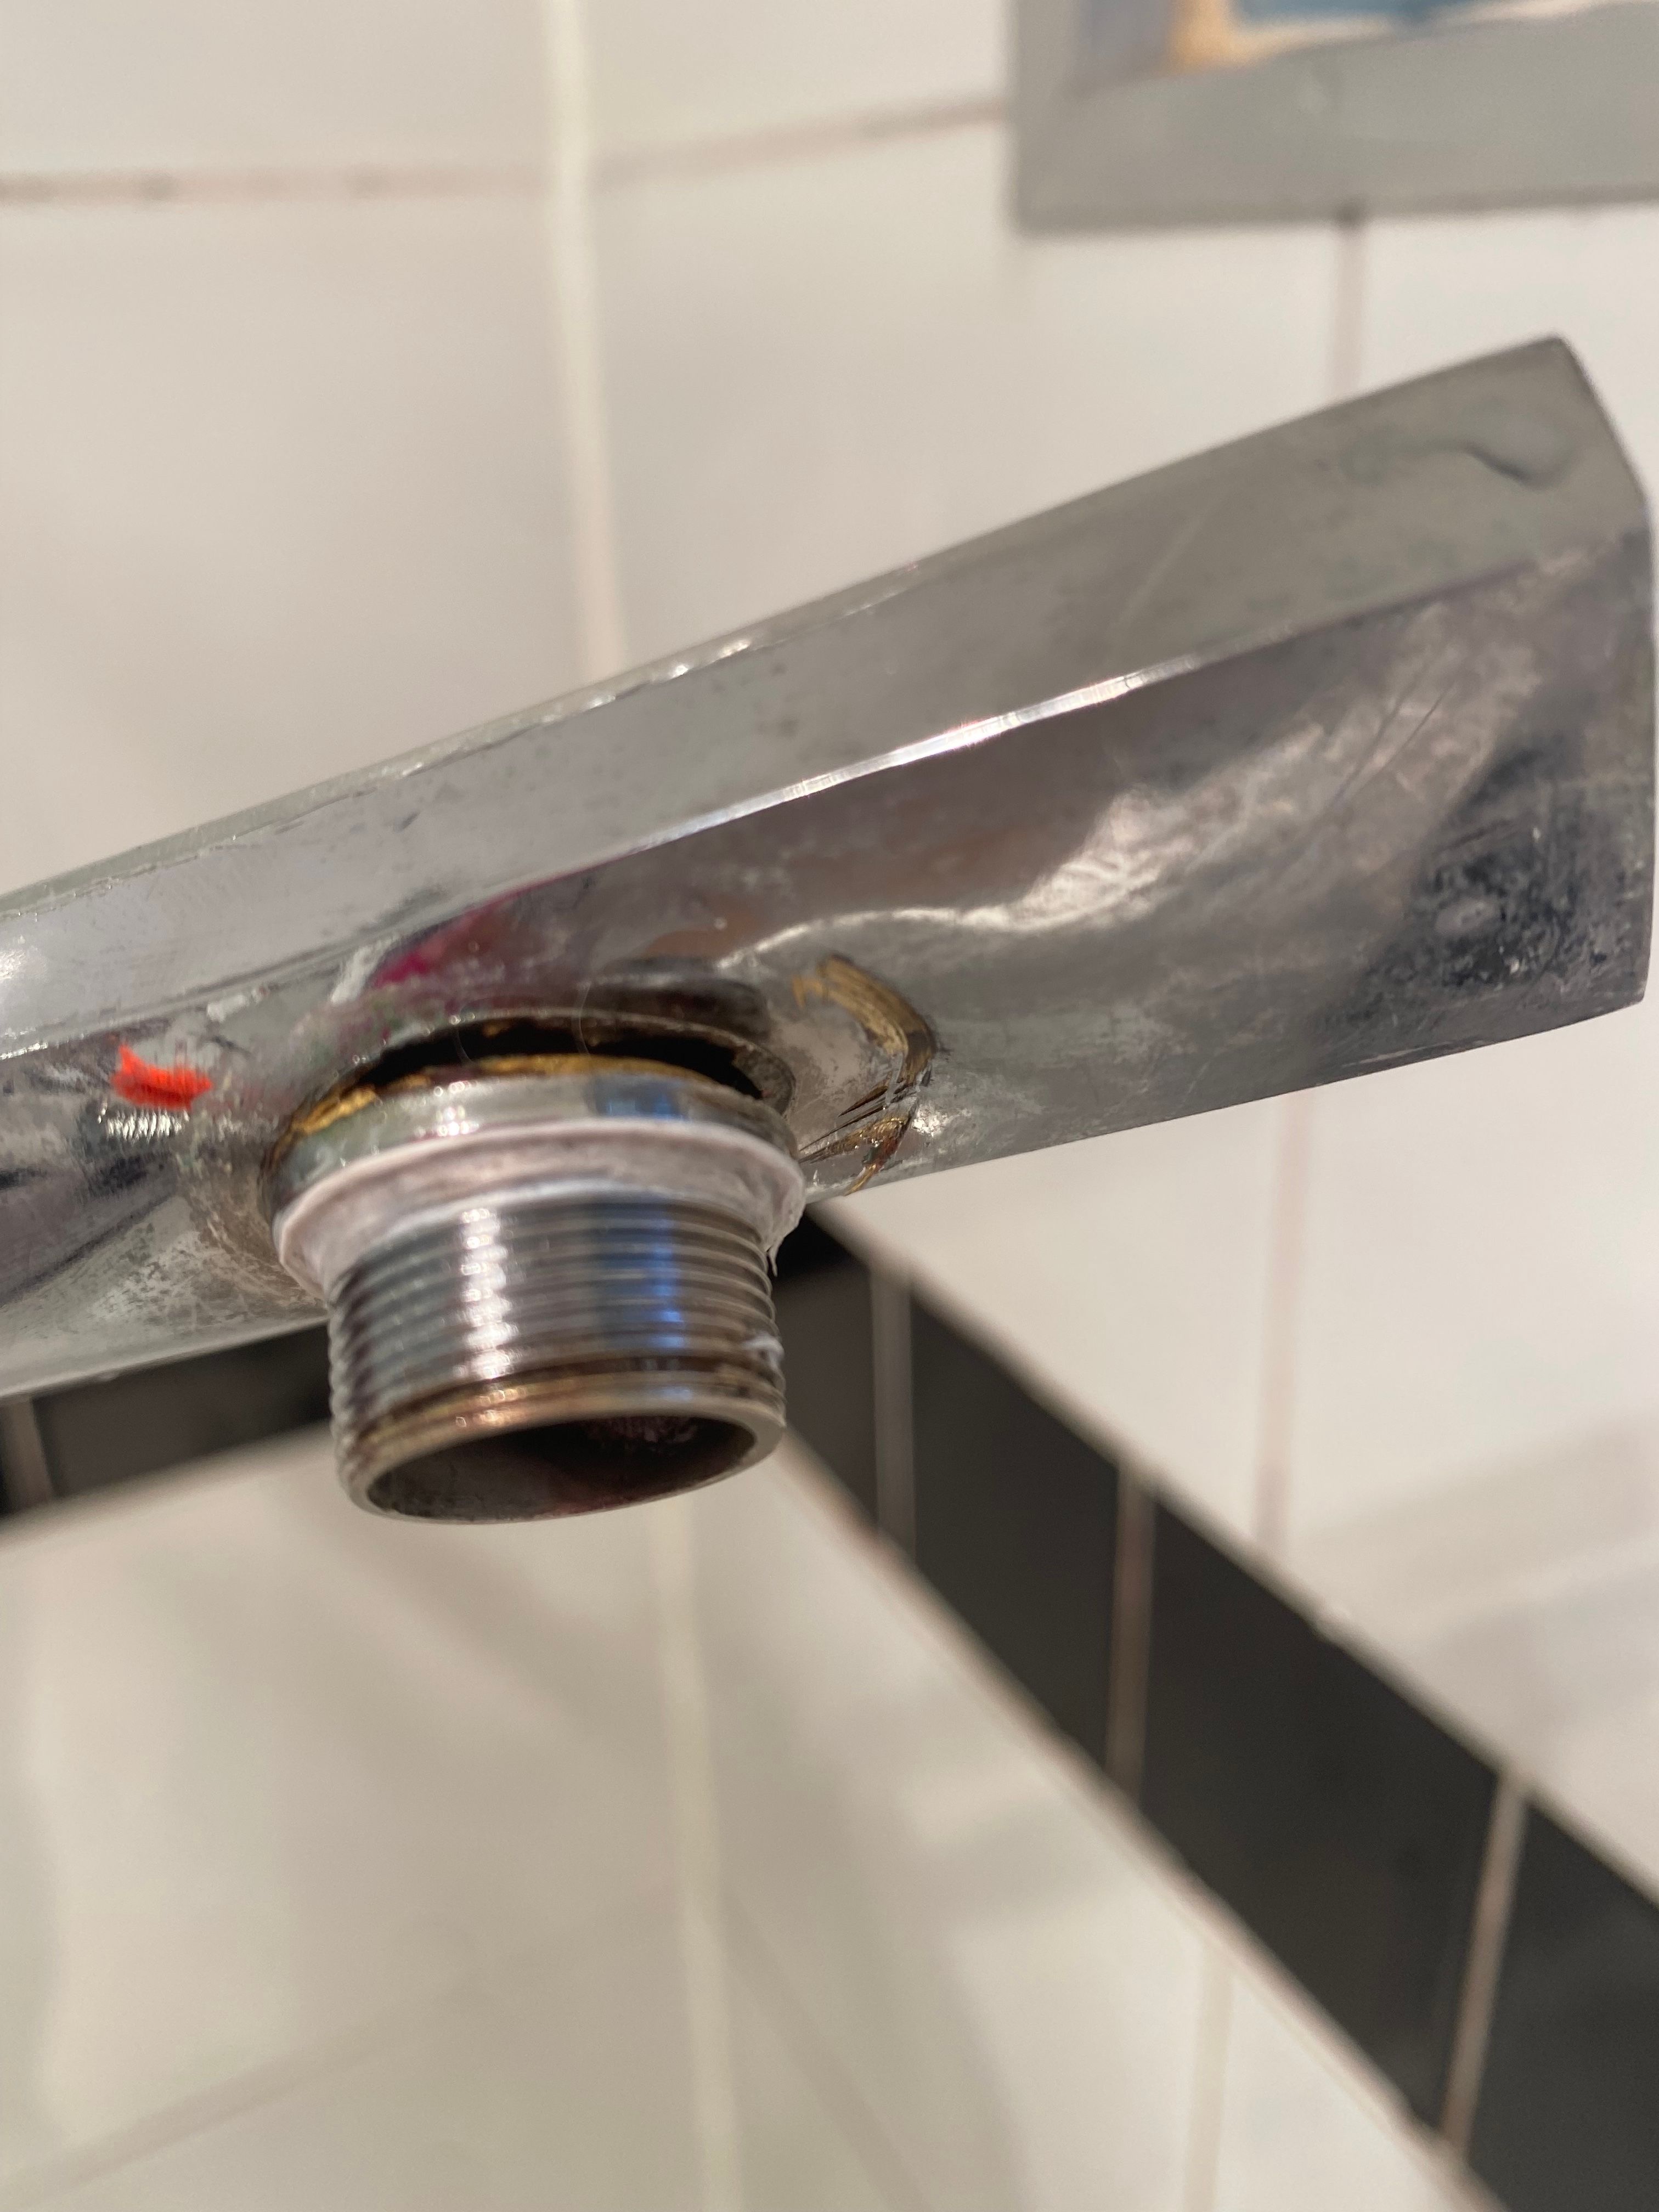 How to replace shower head? | Bunnings Workshop community